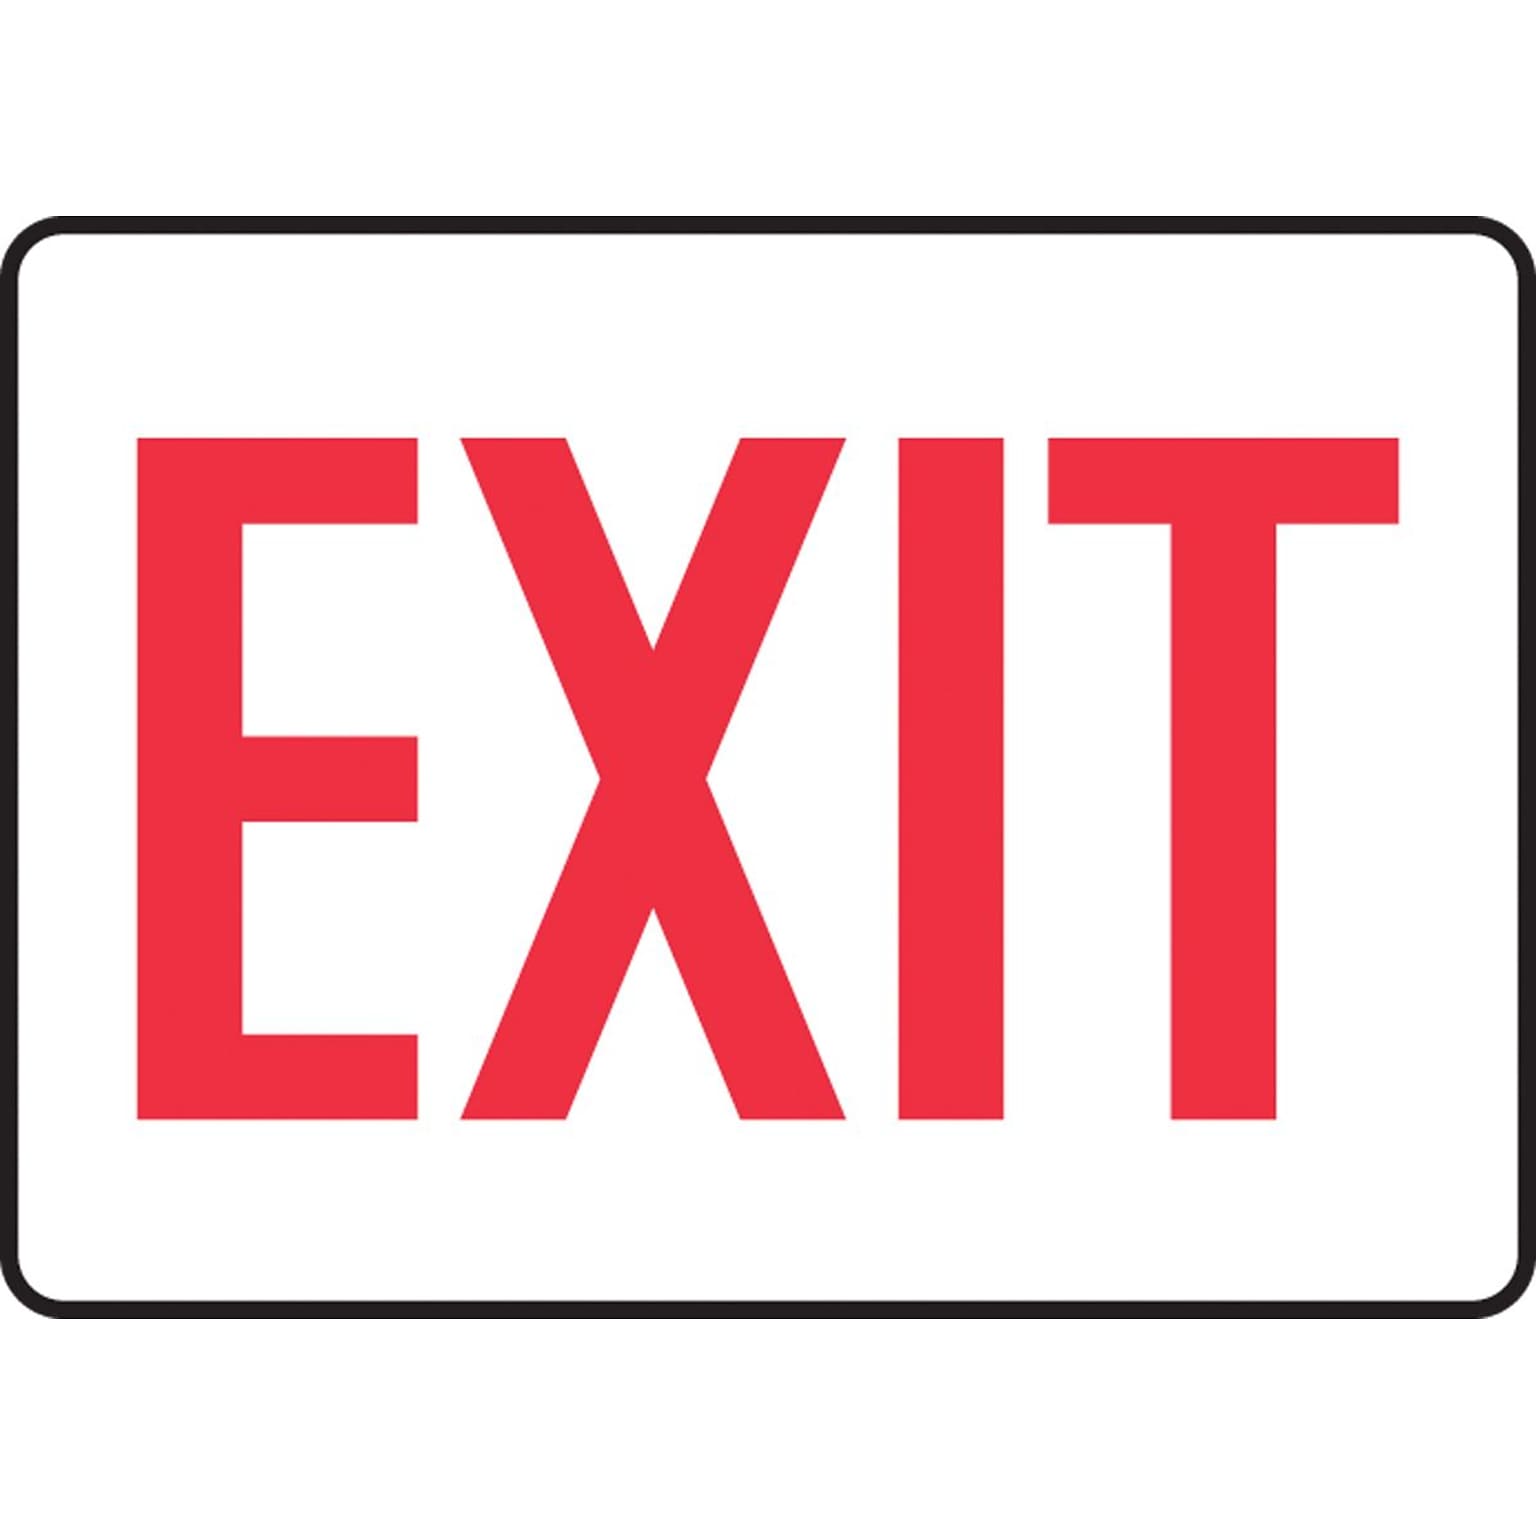 Accuform 7 x 10 Aluminum Safety Sign EXIT, Red On White (MADC531VA)